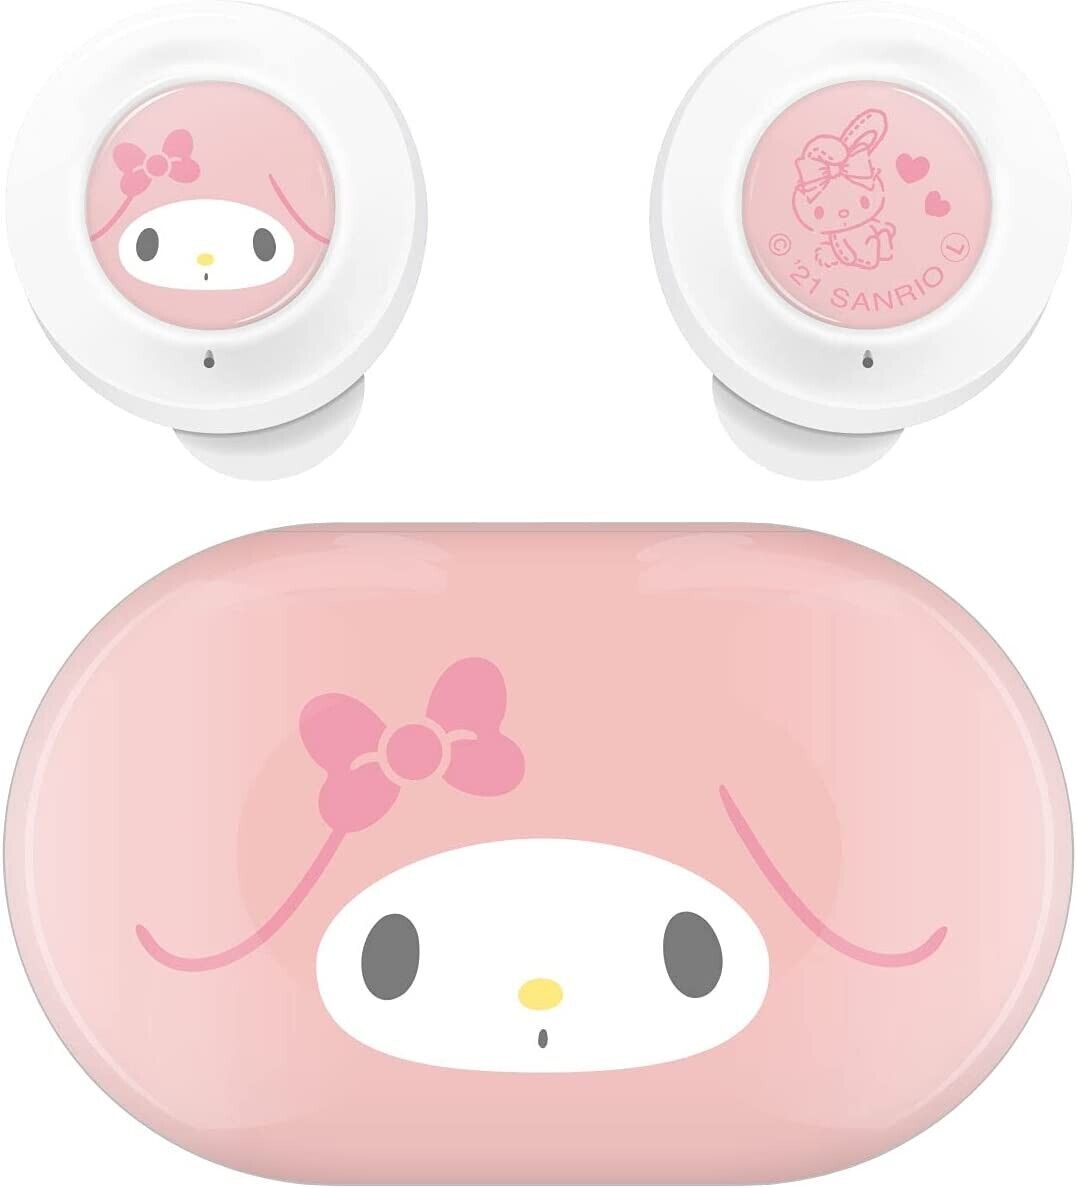 SANG-136MM SANRIO Mymelody Gourmandise Completely Wireless Stereo Earphones